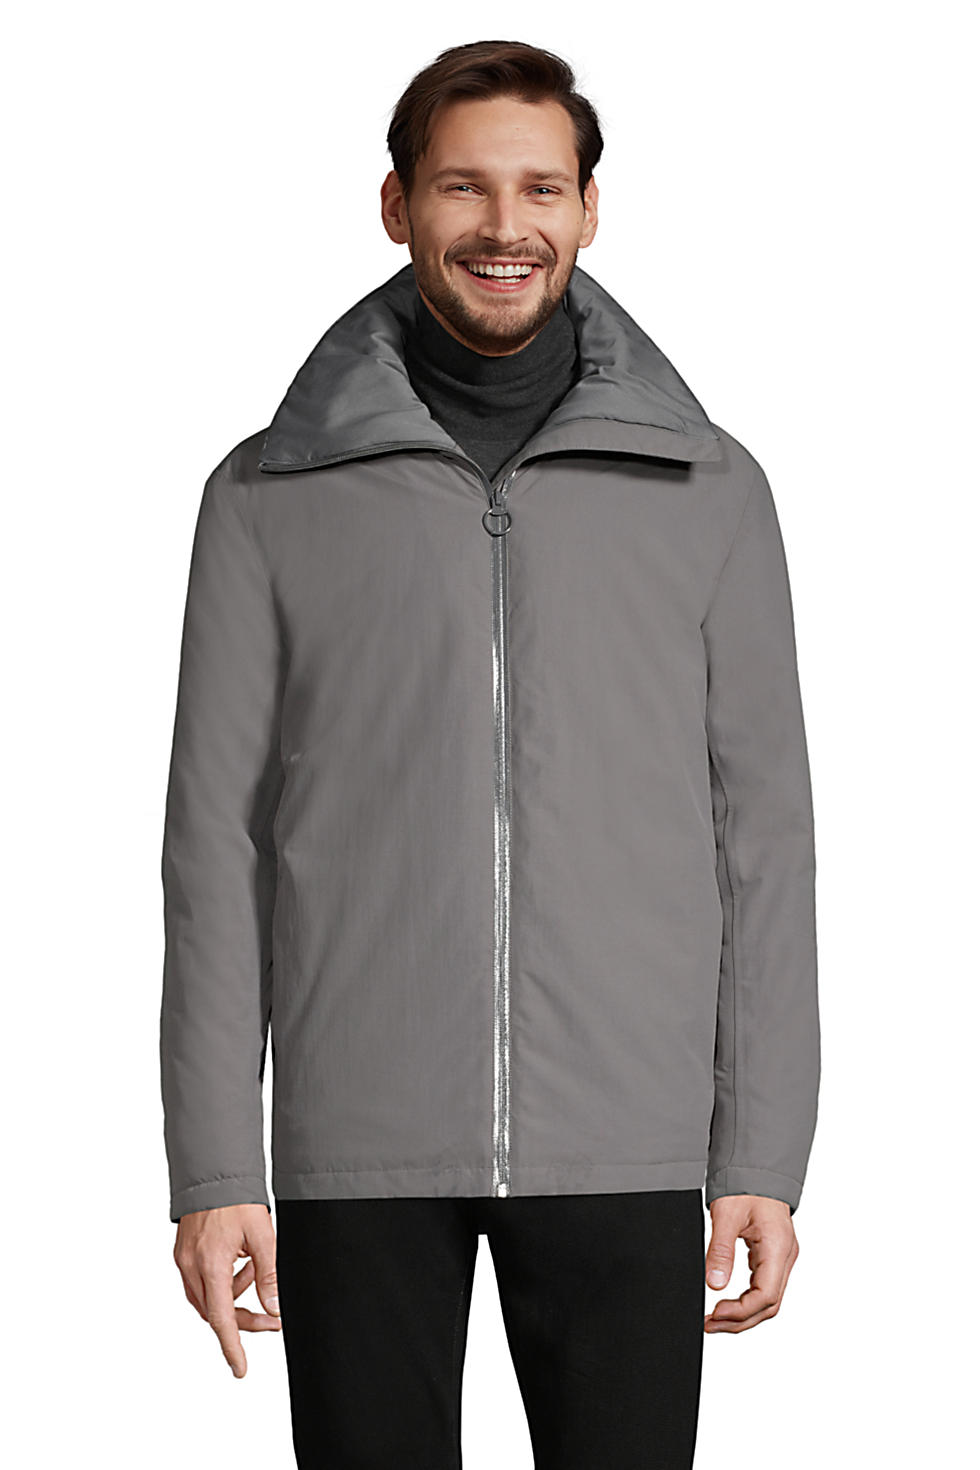 Lands' End Men's Enviro Shield Squall Insulated Balaclava Jacket (2 color options)